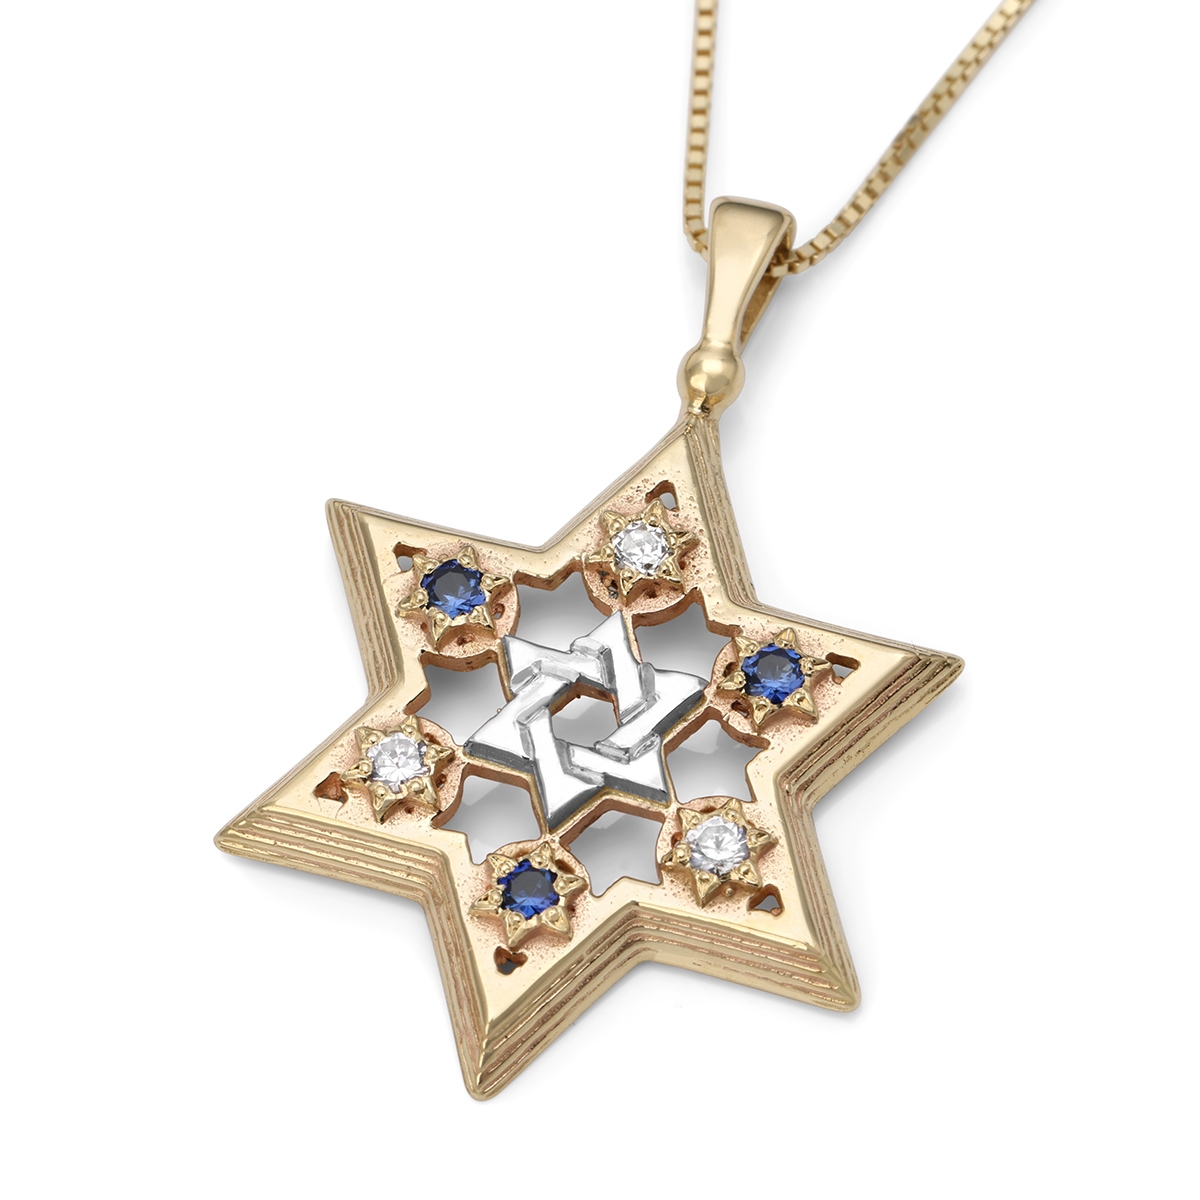 14K Gold Star of David Pendant with Diamonds and Sapphires - 1